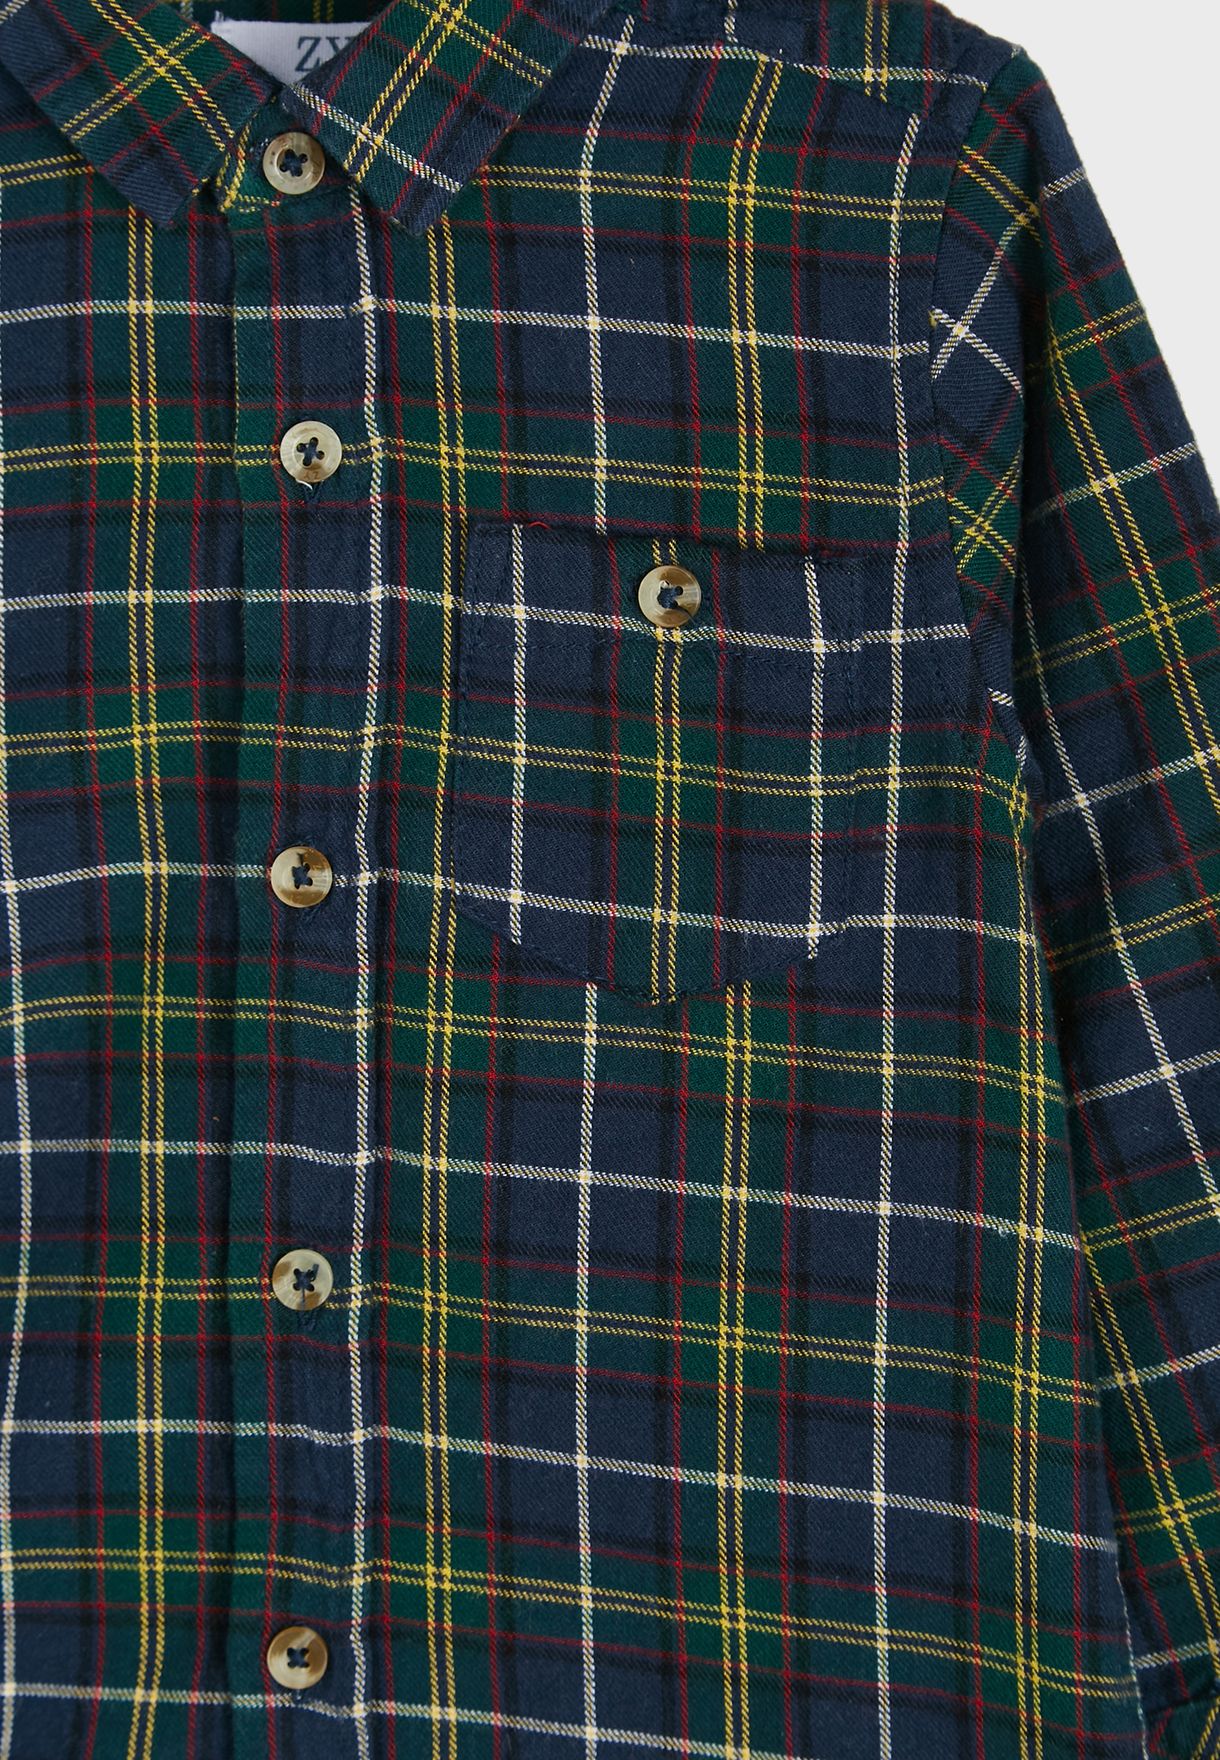 Infant Checked Shirt